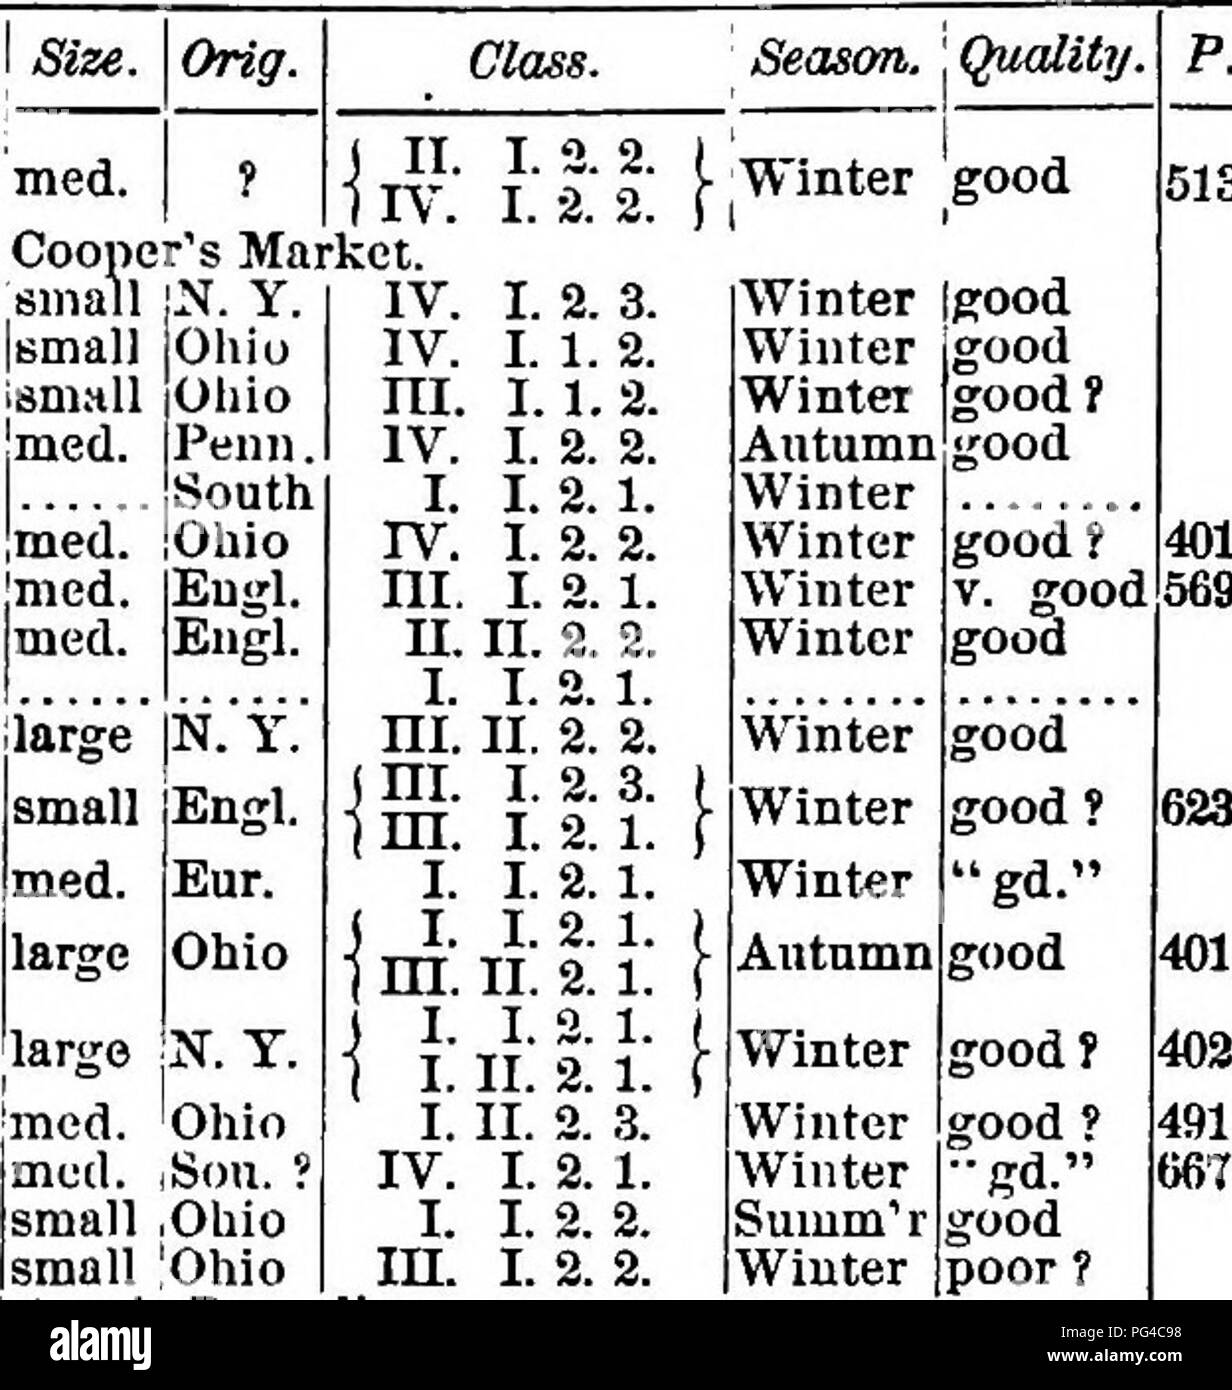 . American pomology : apples . Apples. 716 CATALOGUE AlTD INDEX OE APPI. Cooper's Market Cooper^s Ifed/ing, Synonym of Coov)er''s Market. Cooper's Russciing small Cope's Red Sweet |smalJ Cope's Sweet ismall Cornell's Fancy jmed. Cornfield Cornfield Imed. CoriilNli Aromatic jmed. Cornish Gilliftower med. Corse's Favorite I Cos large Court of Wyck Court Pendu Plat Cracking , med. med. IV. large med. Cranberry Pippin.. Cranberry RuÂ«8ct.. Crawford's Keeper. Crei&gt;jhtou Crib Civoked Limb. Synonym of Watson's Bumplin?. Cropsey's Favorite med. Ills, j fy Crow's Egg Crow's Effij Crownest Cnllasasa  Stock Photo